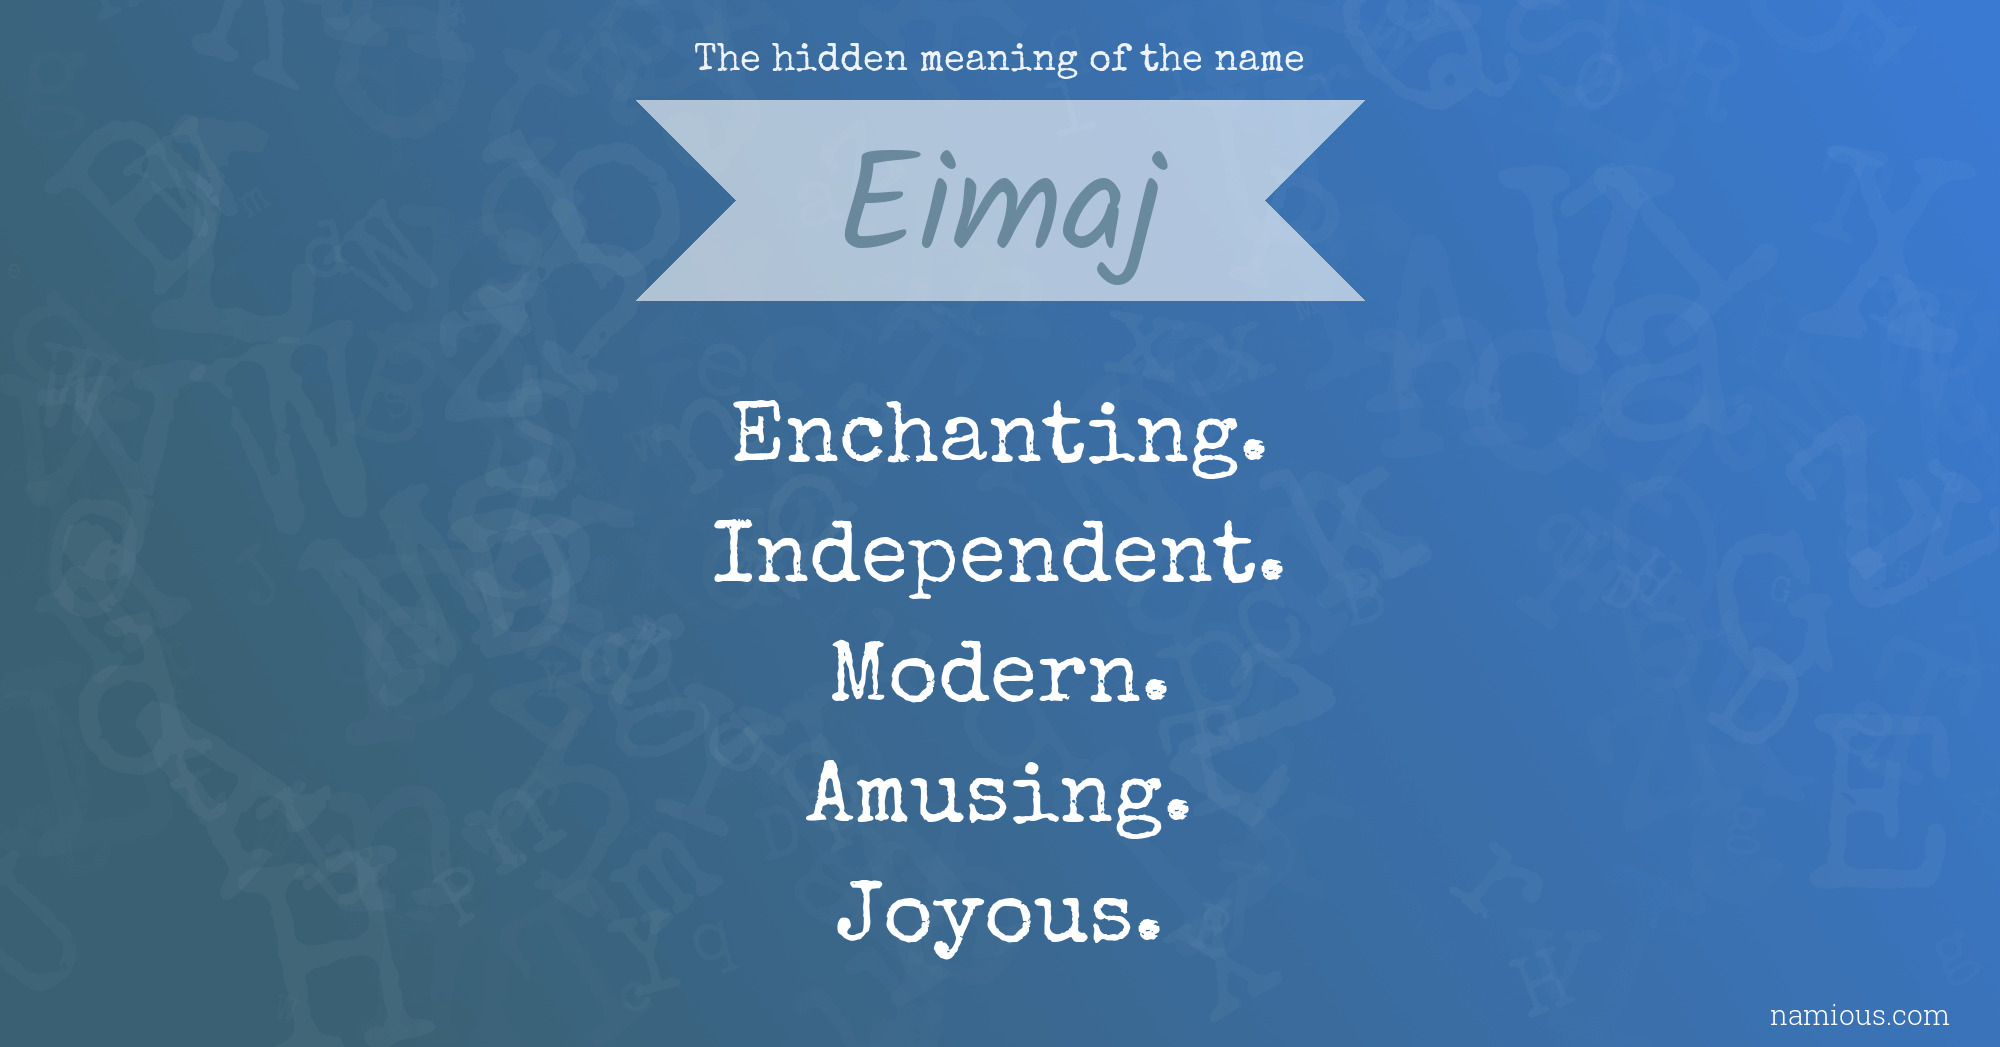 The hidden meaning of the name Eimaj